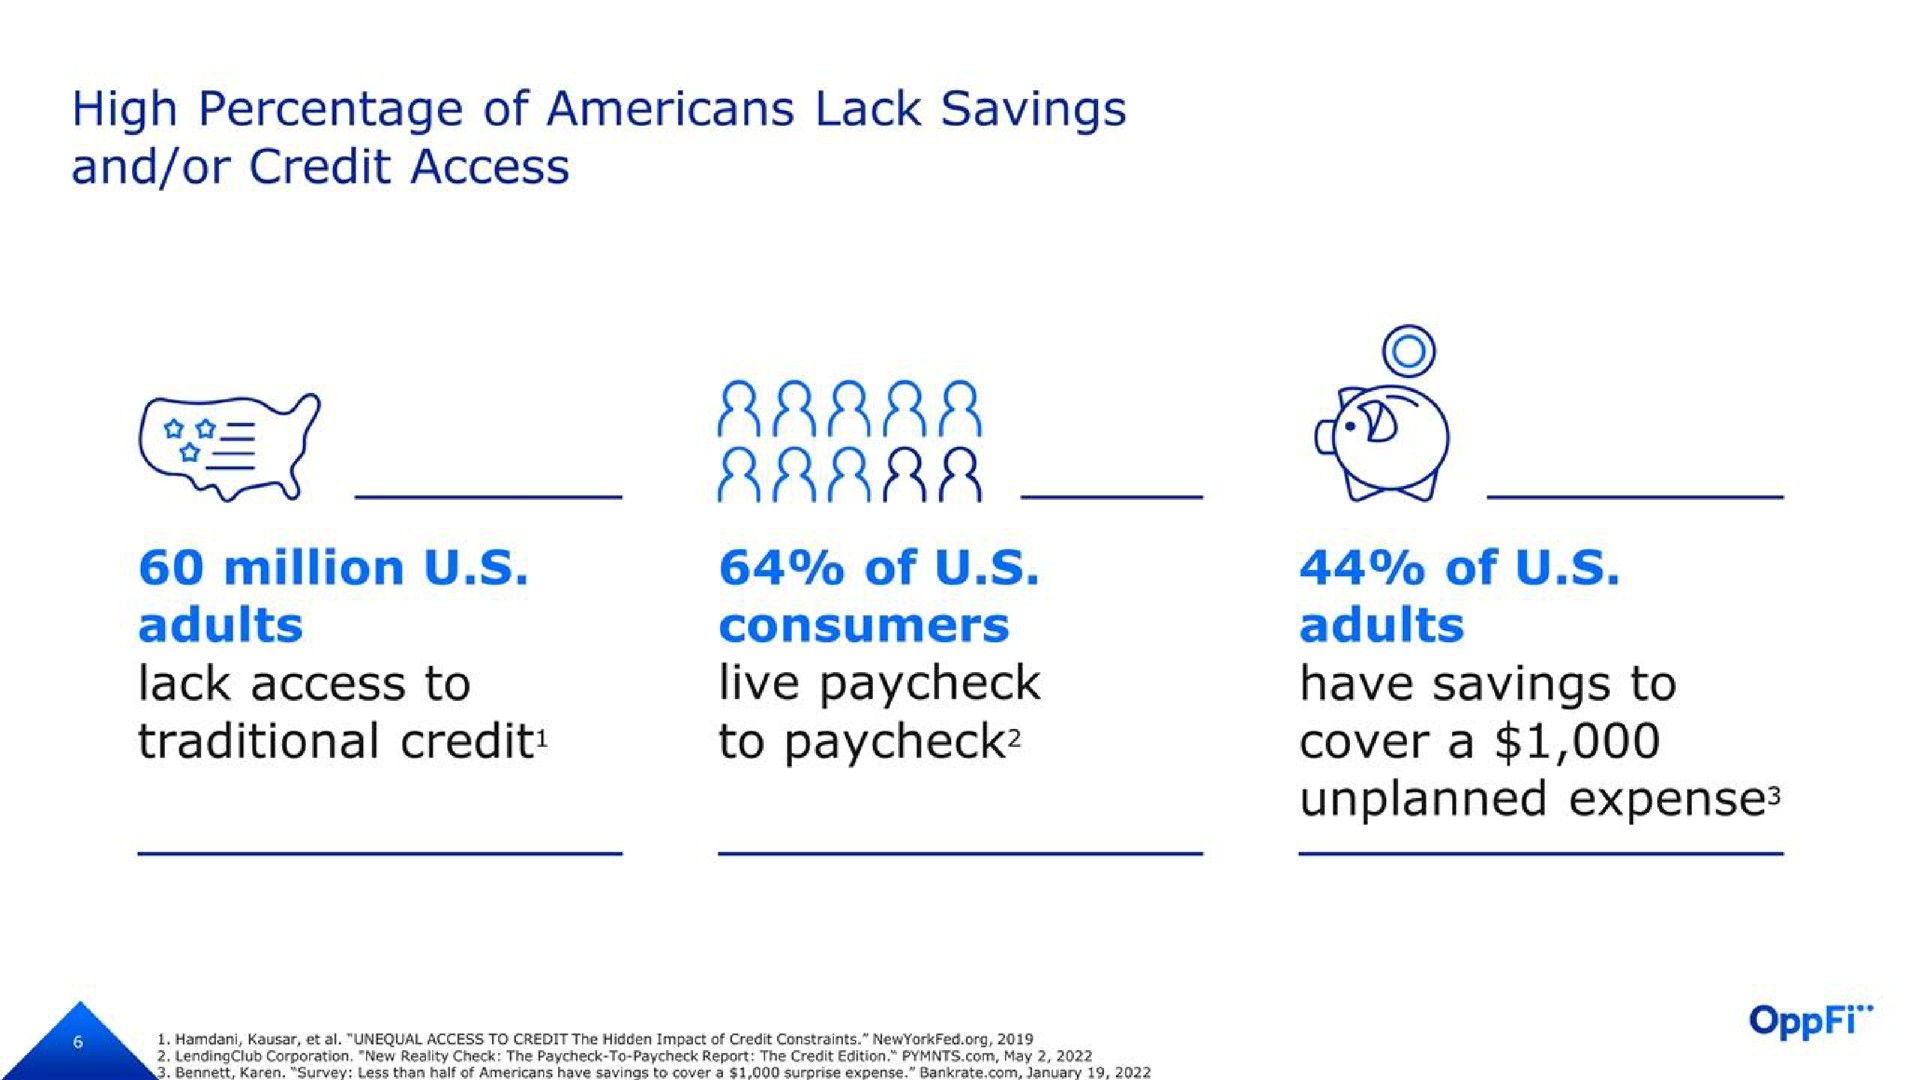 high percentage of lack savings and or credit access million adults lack access to traditional credit of consumers live to of adults have savings to cover a unplanned expense | OppFi